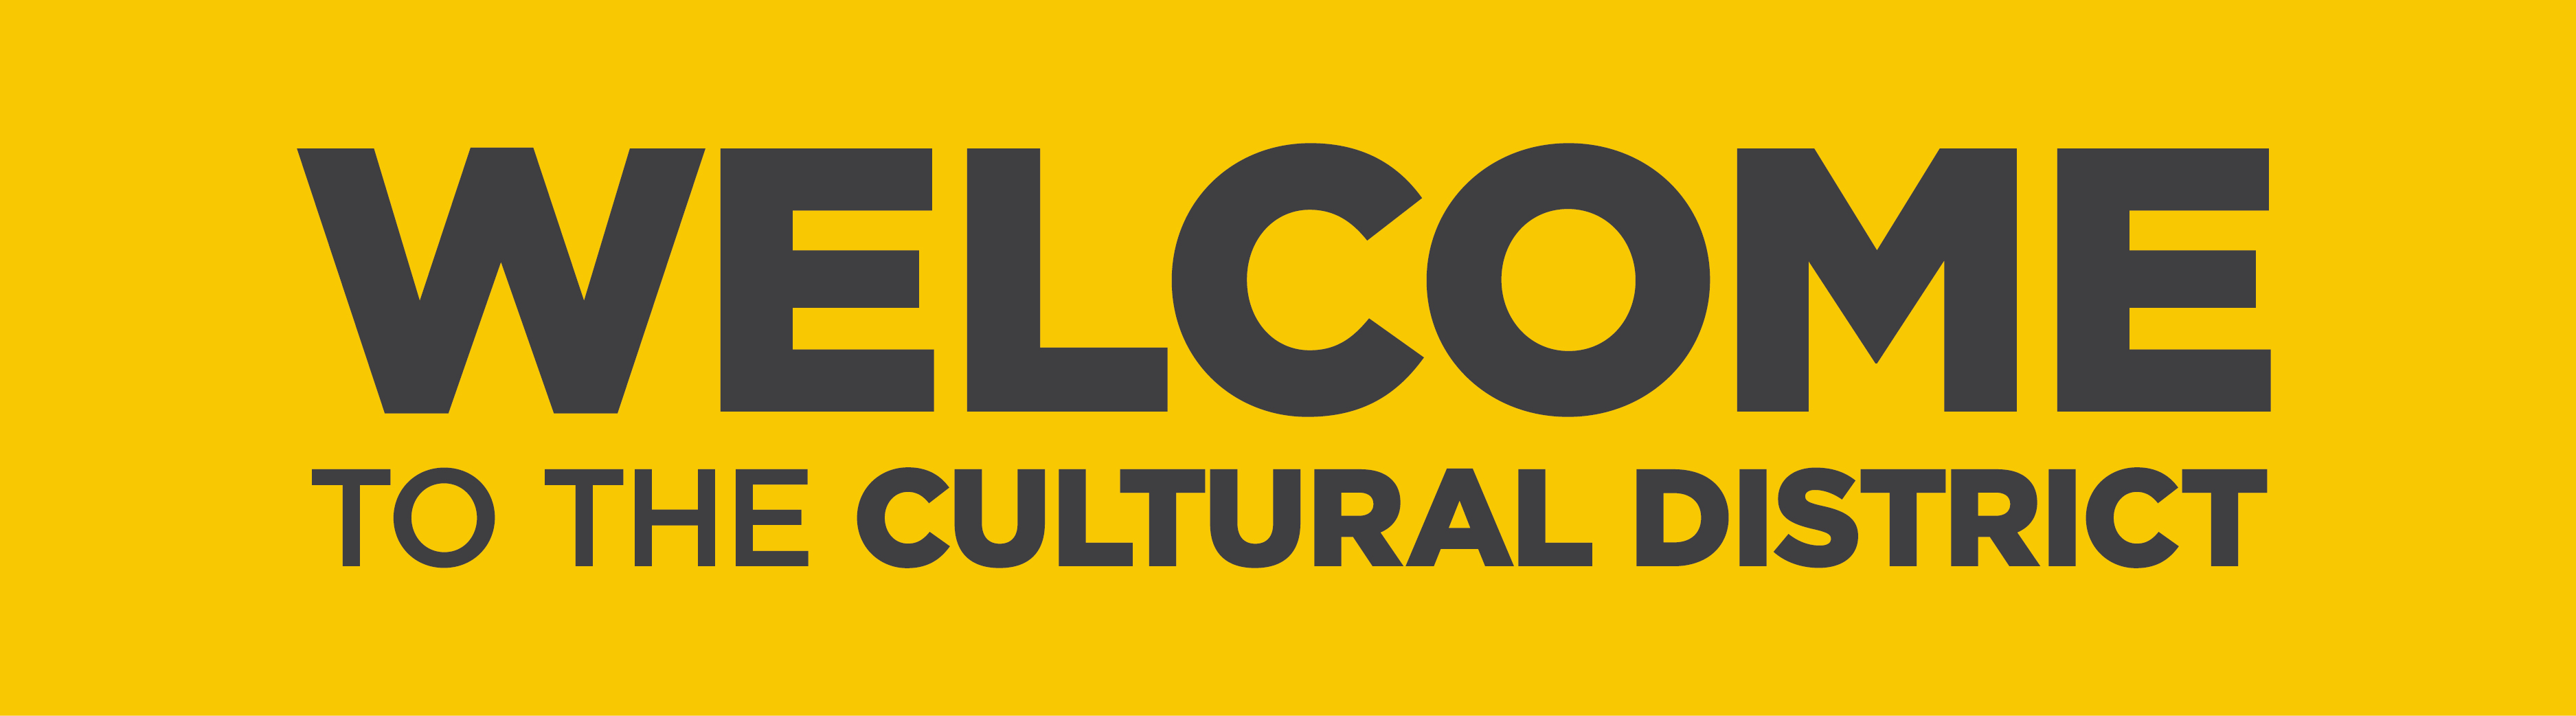 yellow header reads welcome to the cultural district